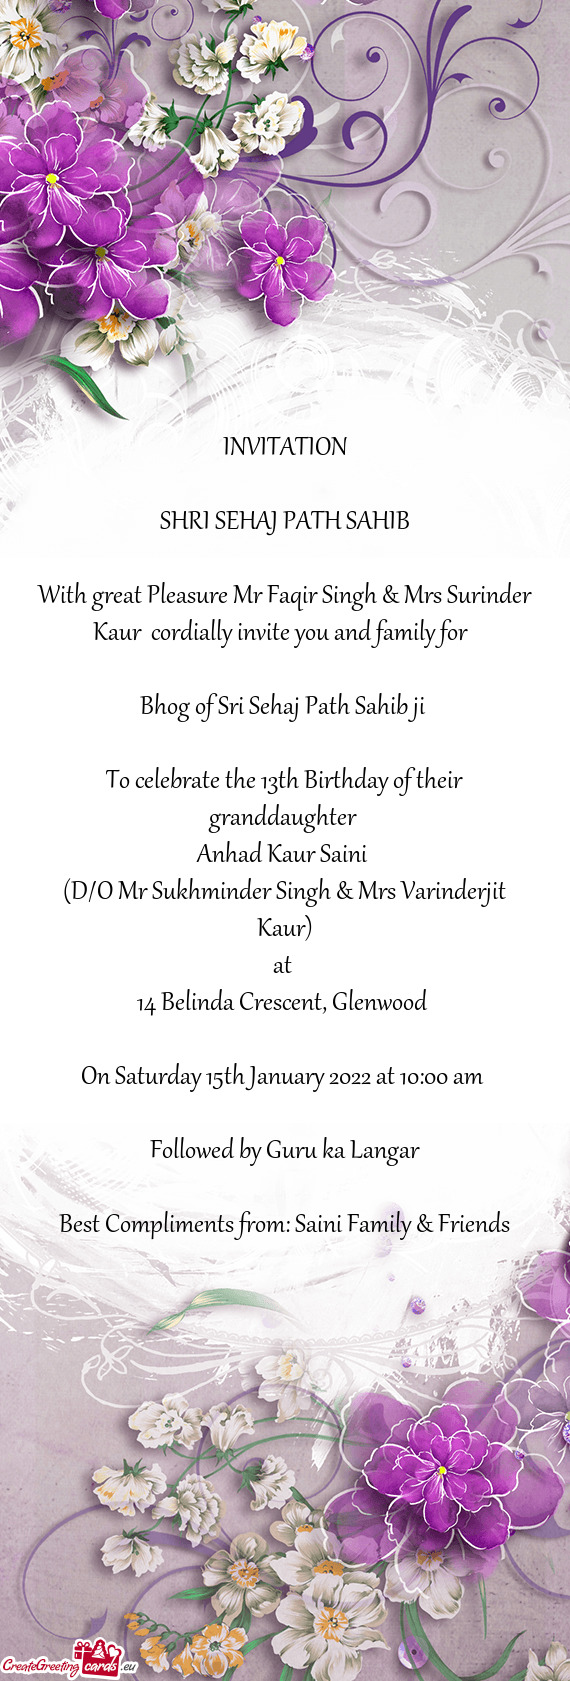 With great Pleasure Mr Faqir Singh & Mrs Surinder Kaur cordially invite you and family for